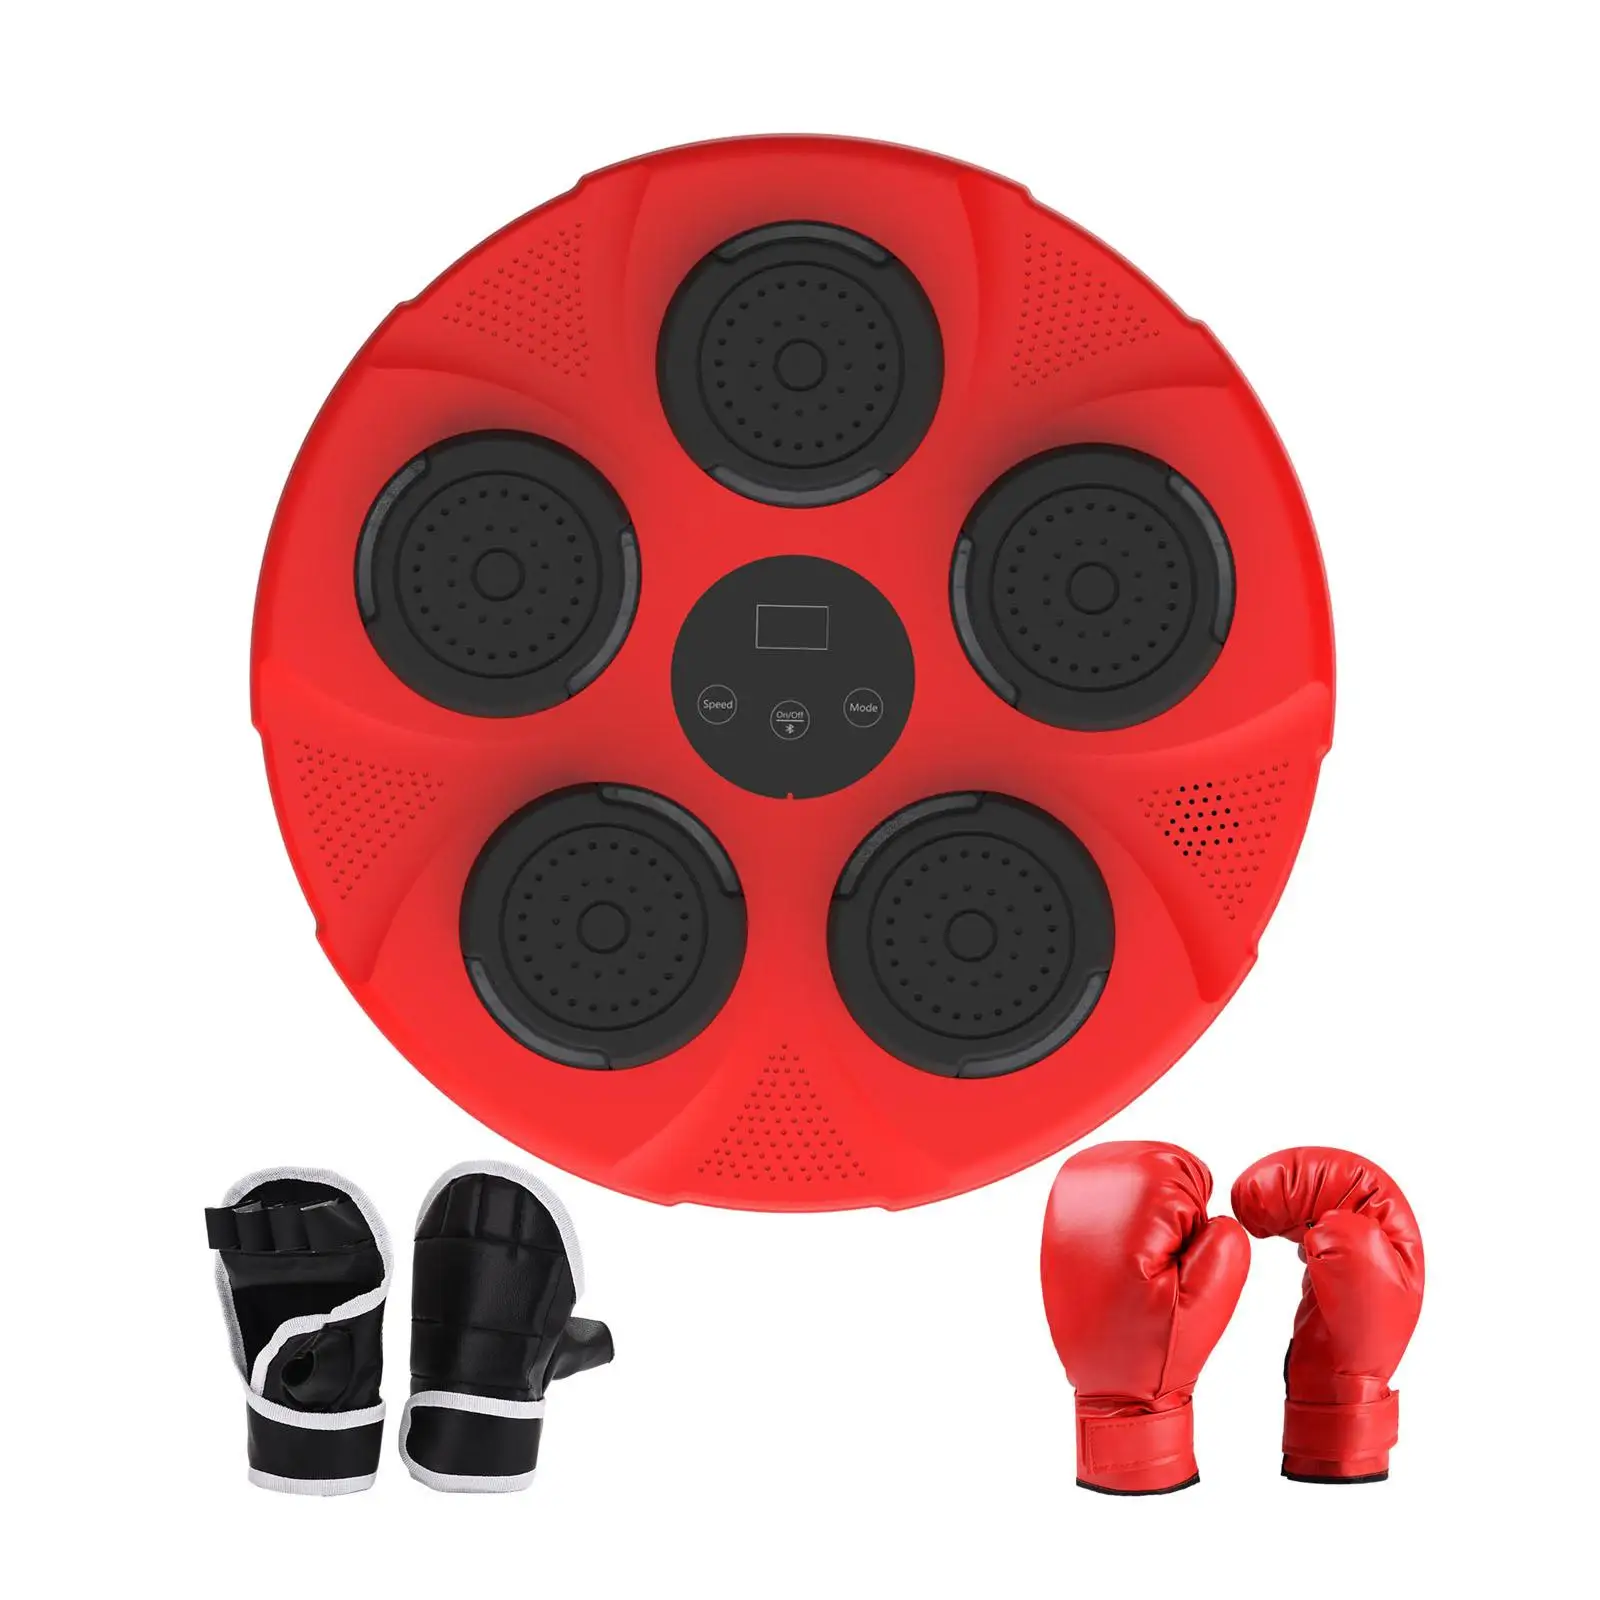 Music Boxing Machine with Counting Function Adjustable Music Boxing Target for Focus Sanda Taekwondo Martial Arts Home Indoor